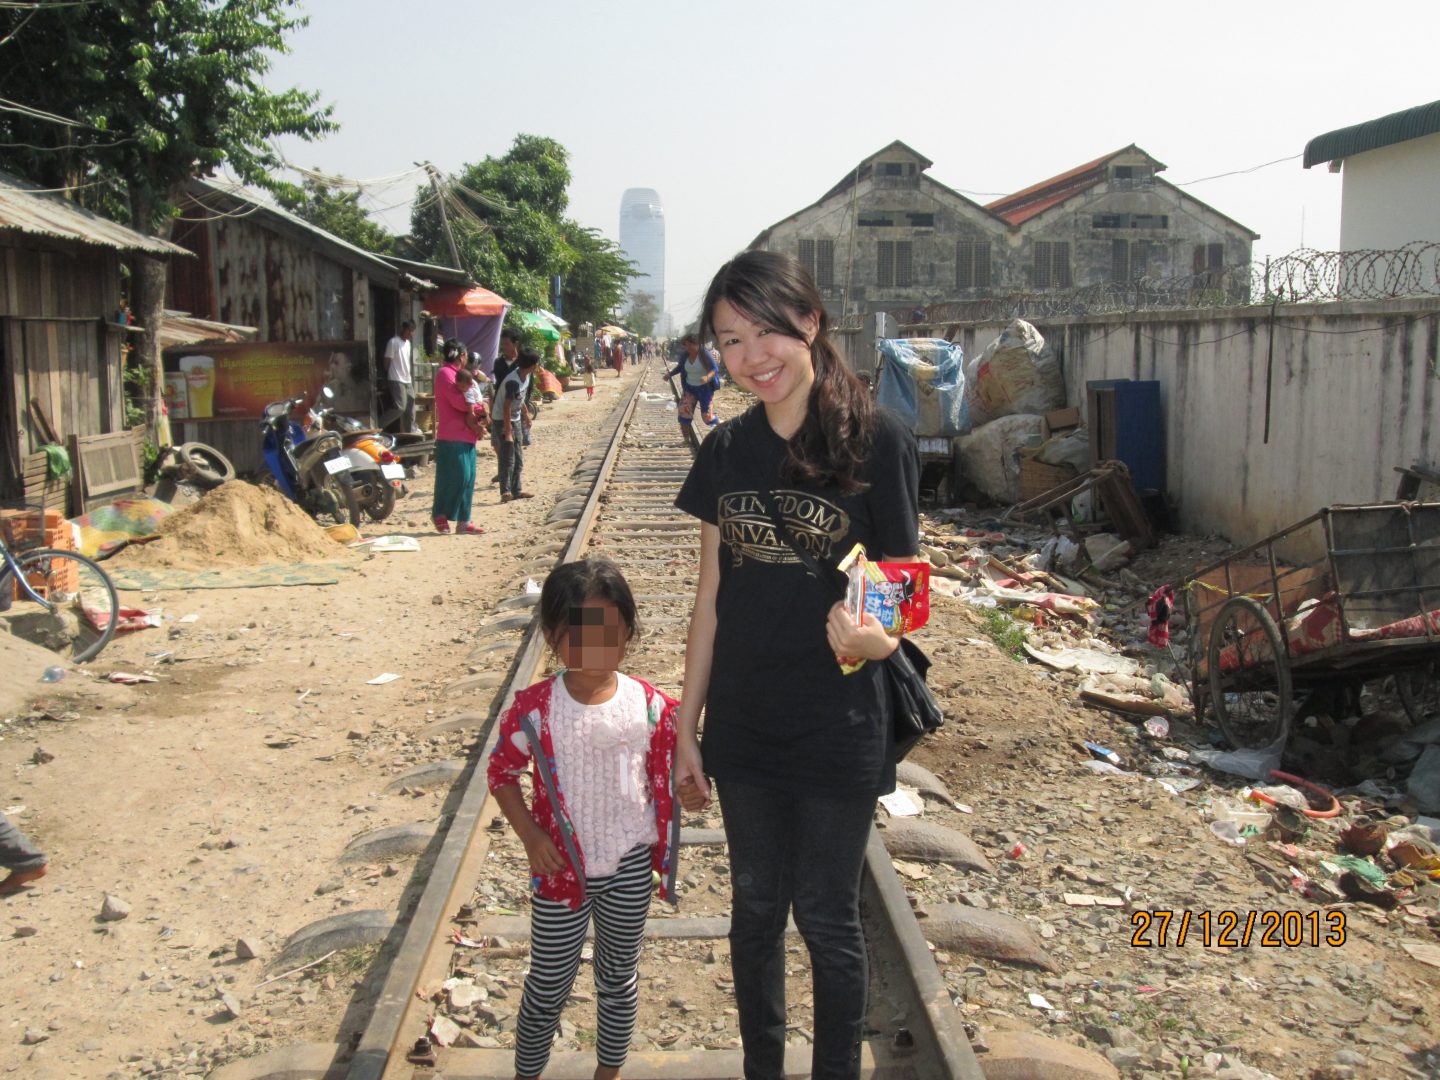 Arielle's mission trip to the slums in Cambodia in 2013. 